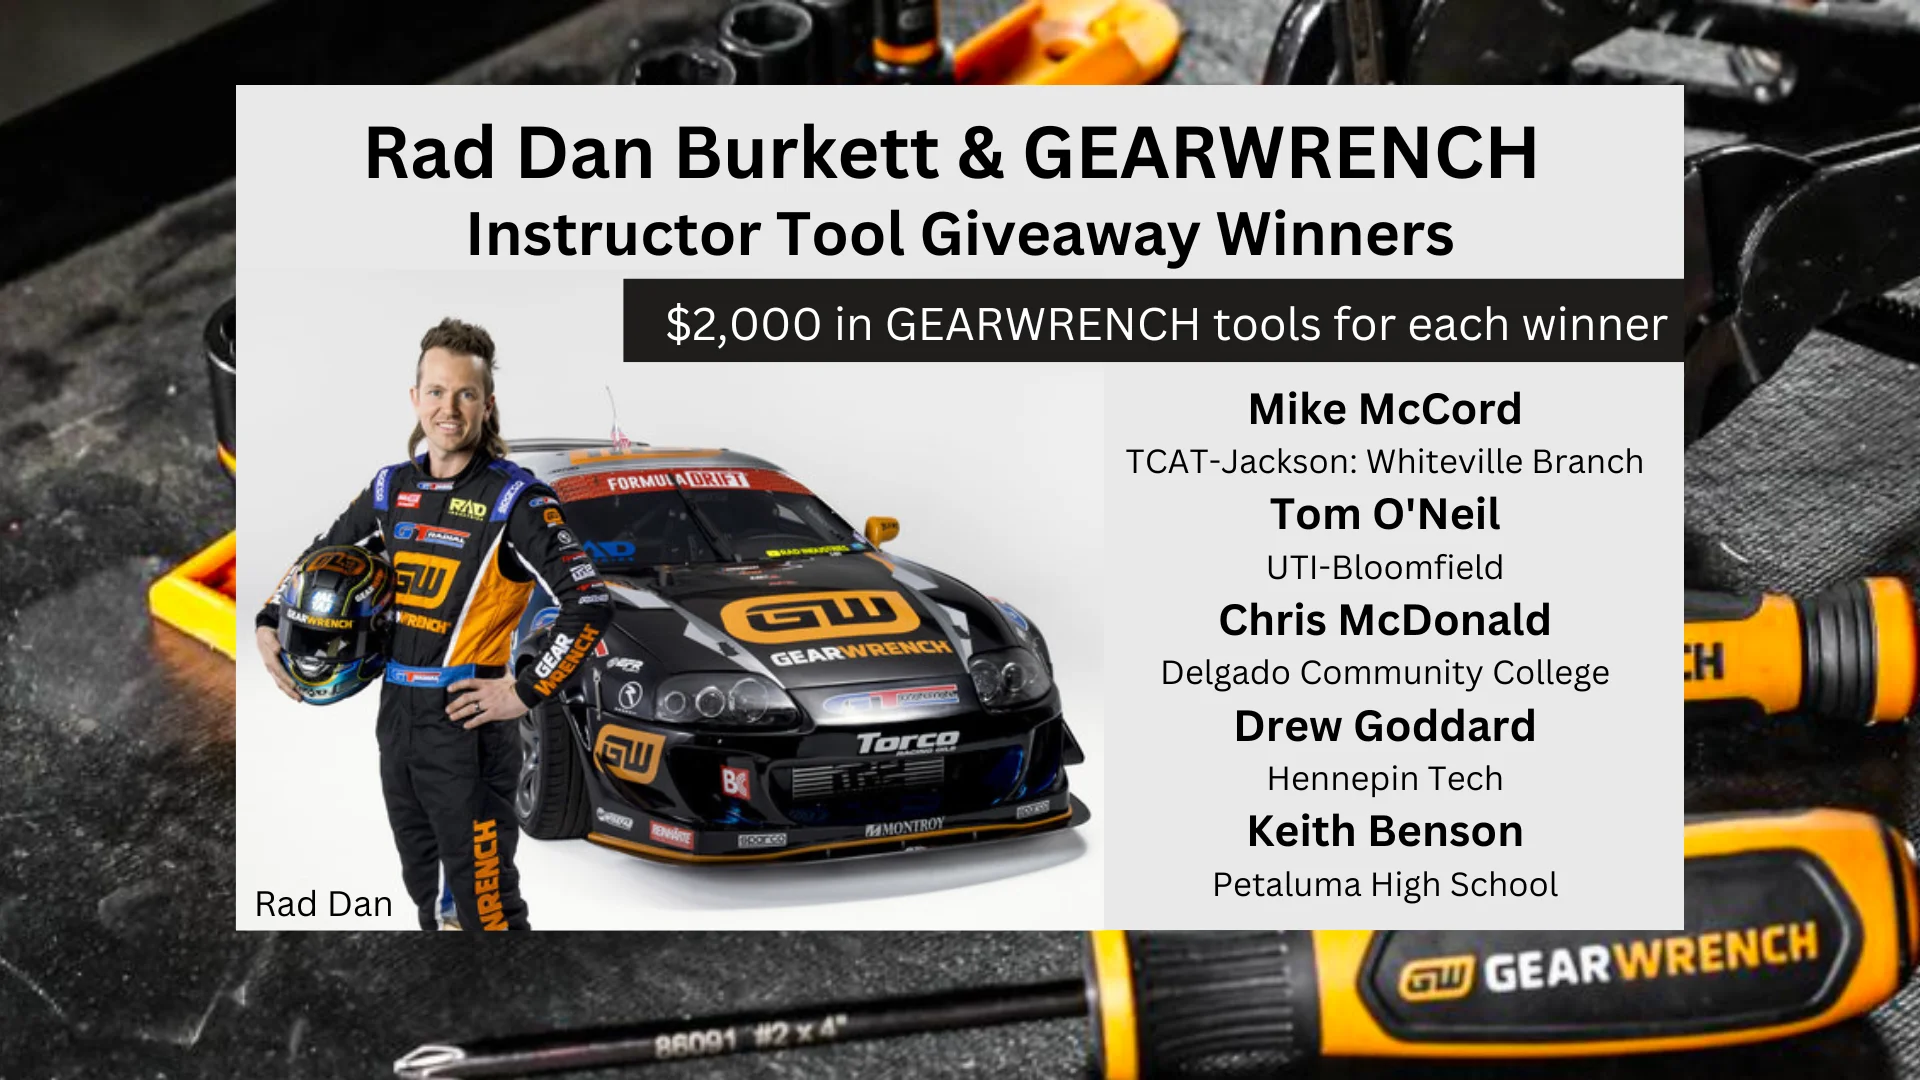 Rad Dan Burkett, TechForce and GEARWRENCH Award $2,000 each in Tools to 5 Instructors